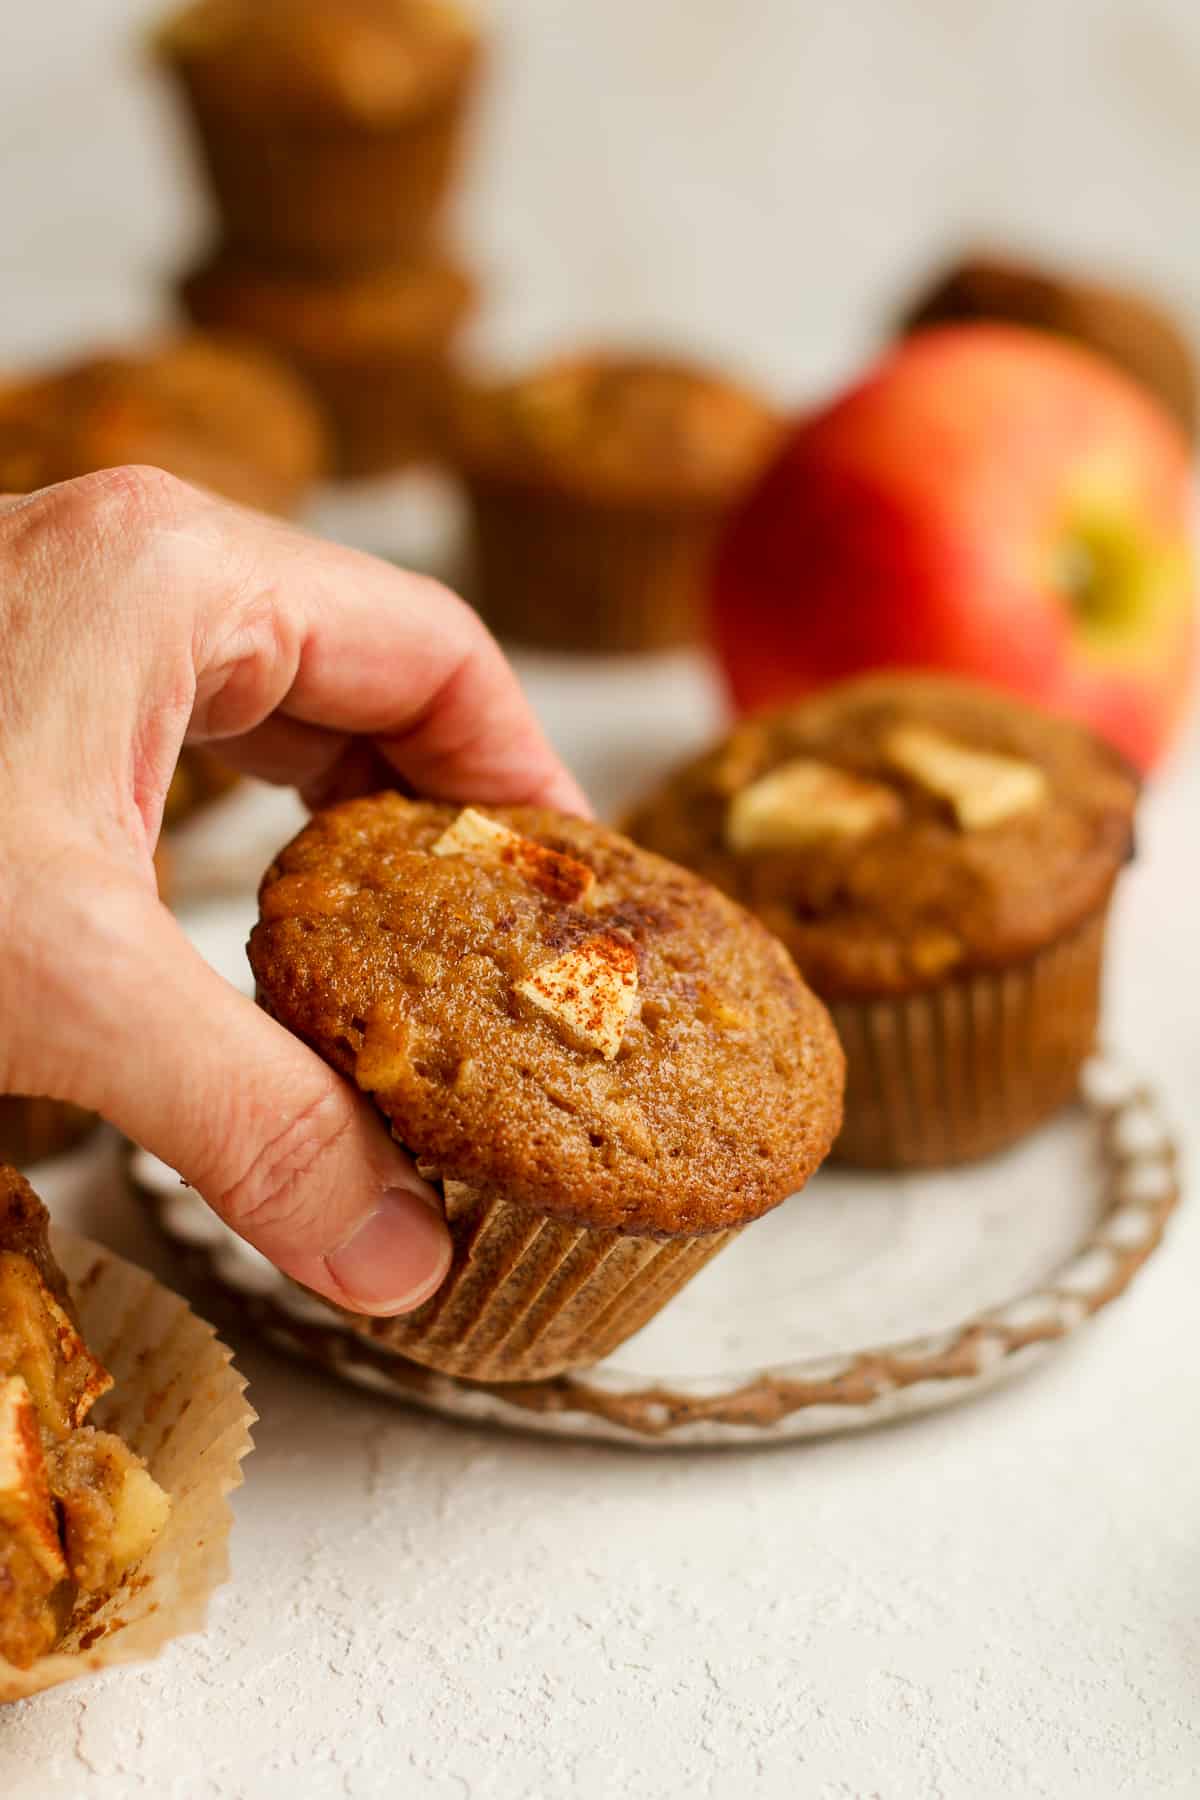 A hand reaching for a baked applesauce cinnamon muffin.